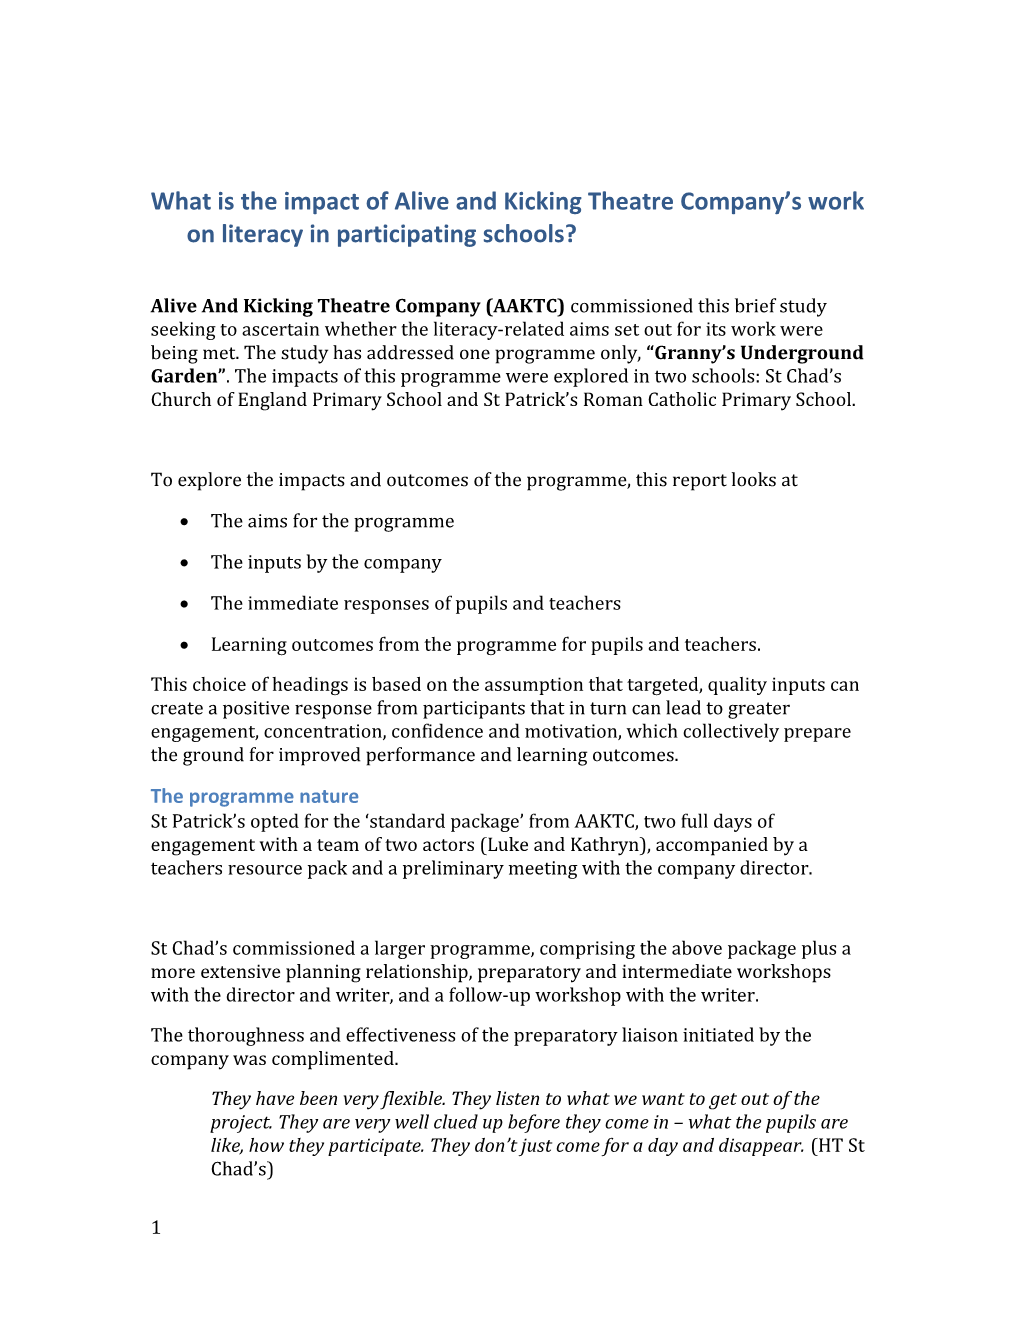 What Is the Impact of Alive and Kicking Theatre Company S Work on Literacy in Participating